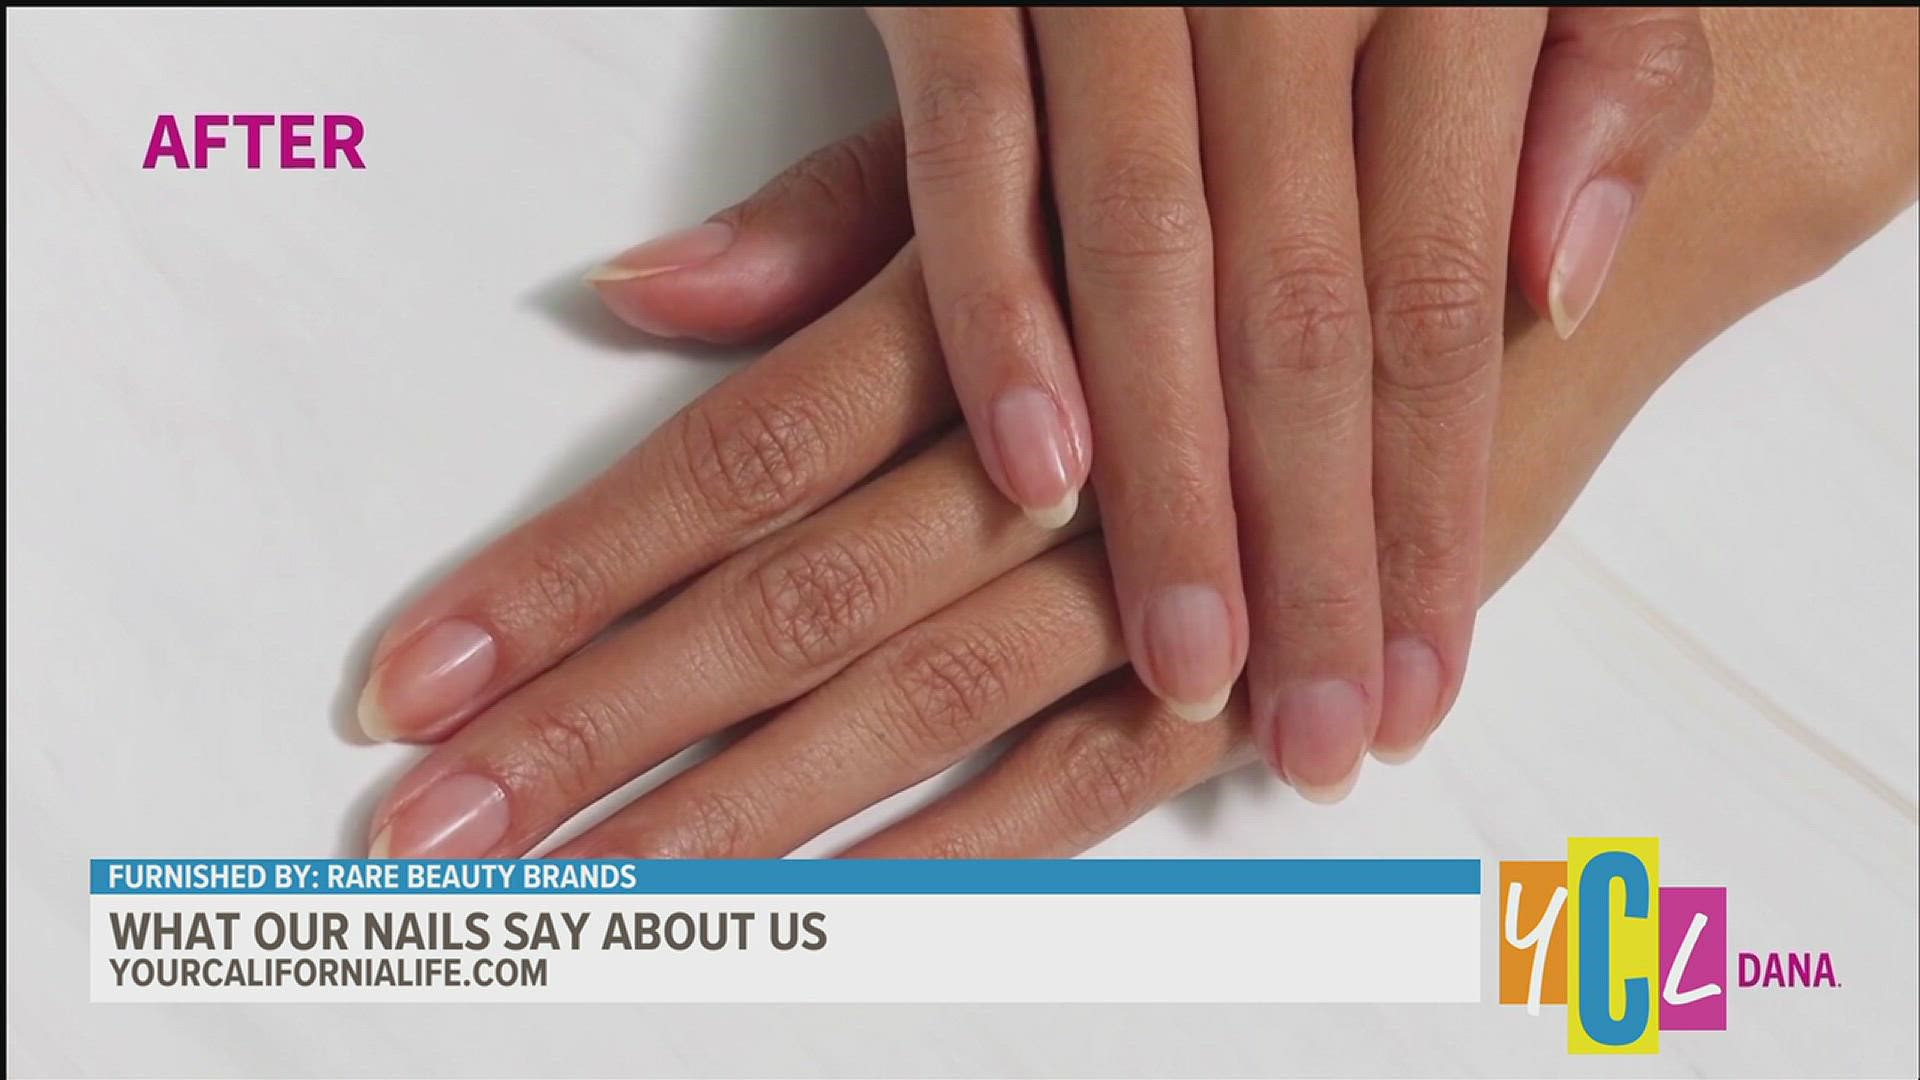 Ridges in Fingernails: Causes and Treatments - Riverchase Dermatology